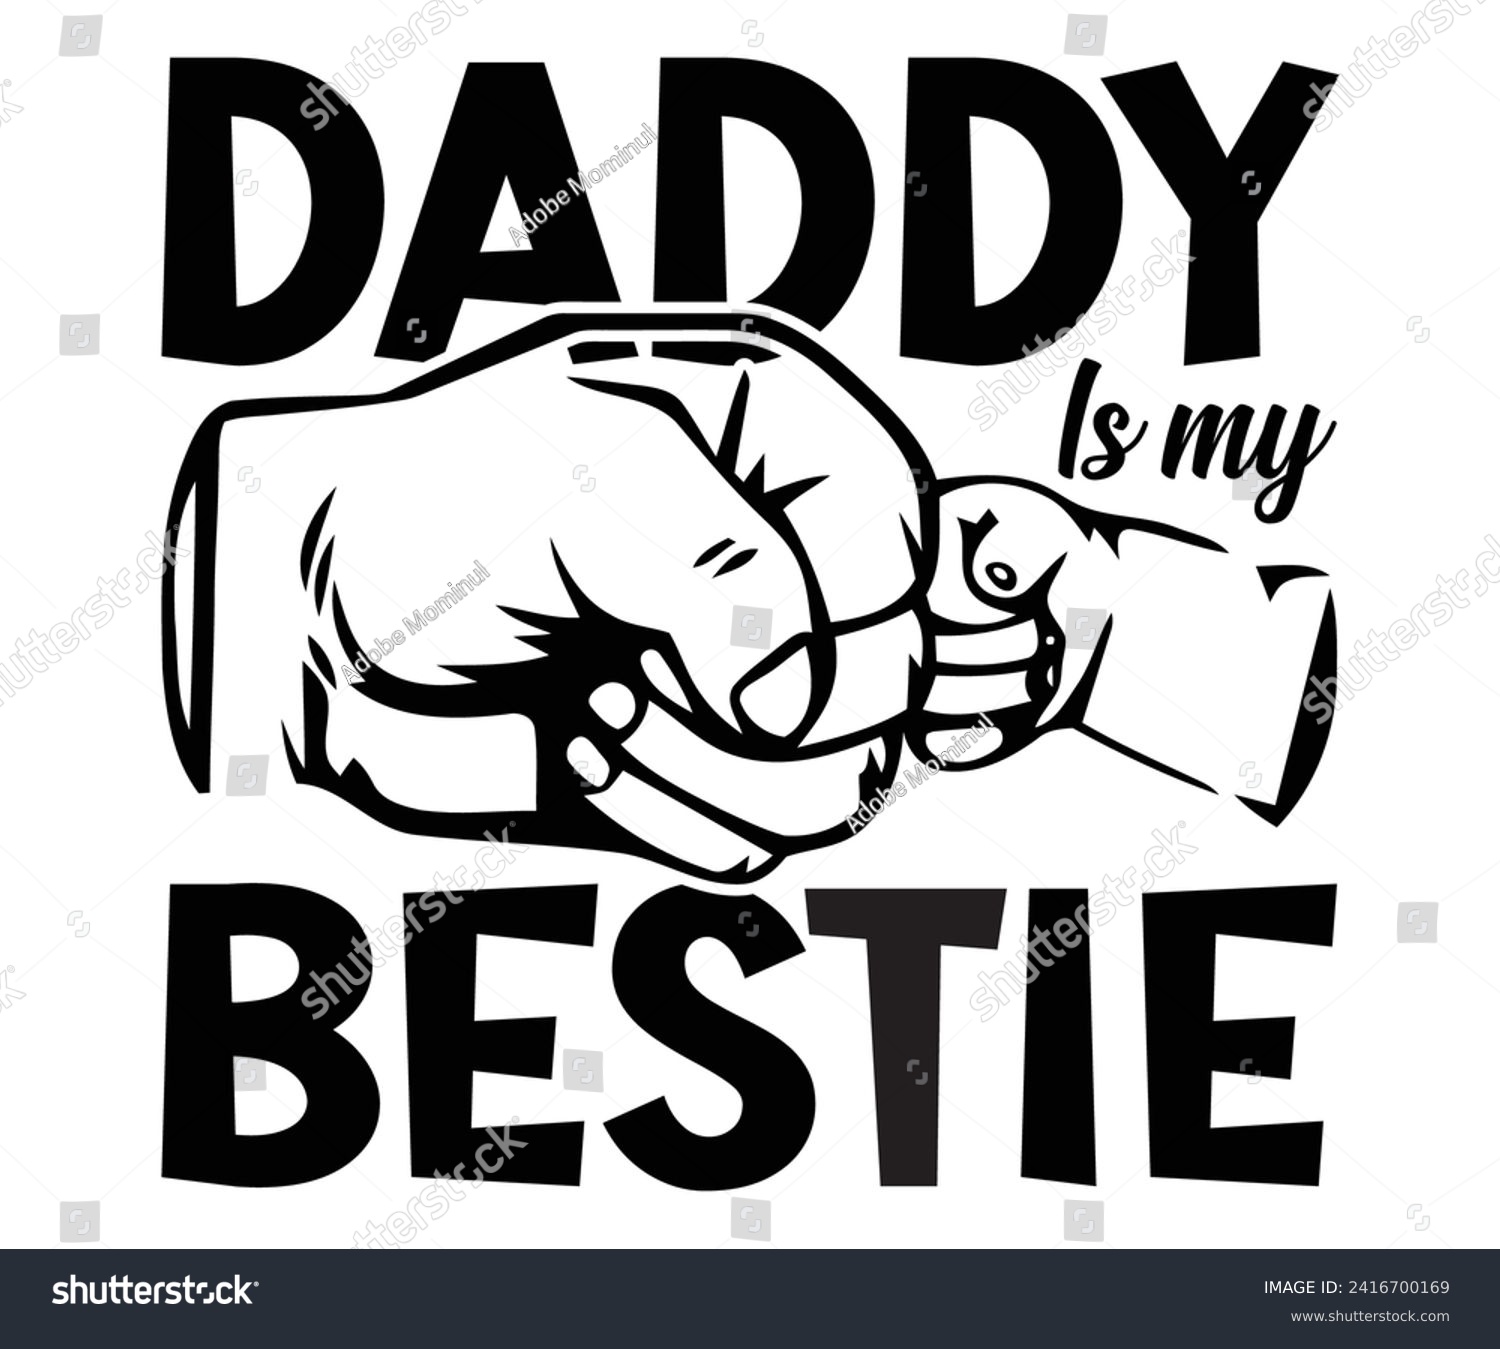 SVG of Daddy Is My Bestie Svg,Father's Day Svg,Papa svg,Grandpa Svg,Father's Day Saying Qoutes,Dad Svg,Funny Father, Gift For Dad Svg,Daddy Svg,Family Svg,T shirt Design,Svg Cut File,Typography svg